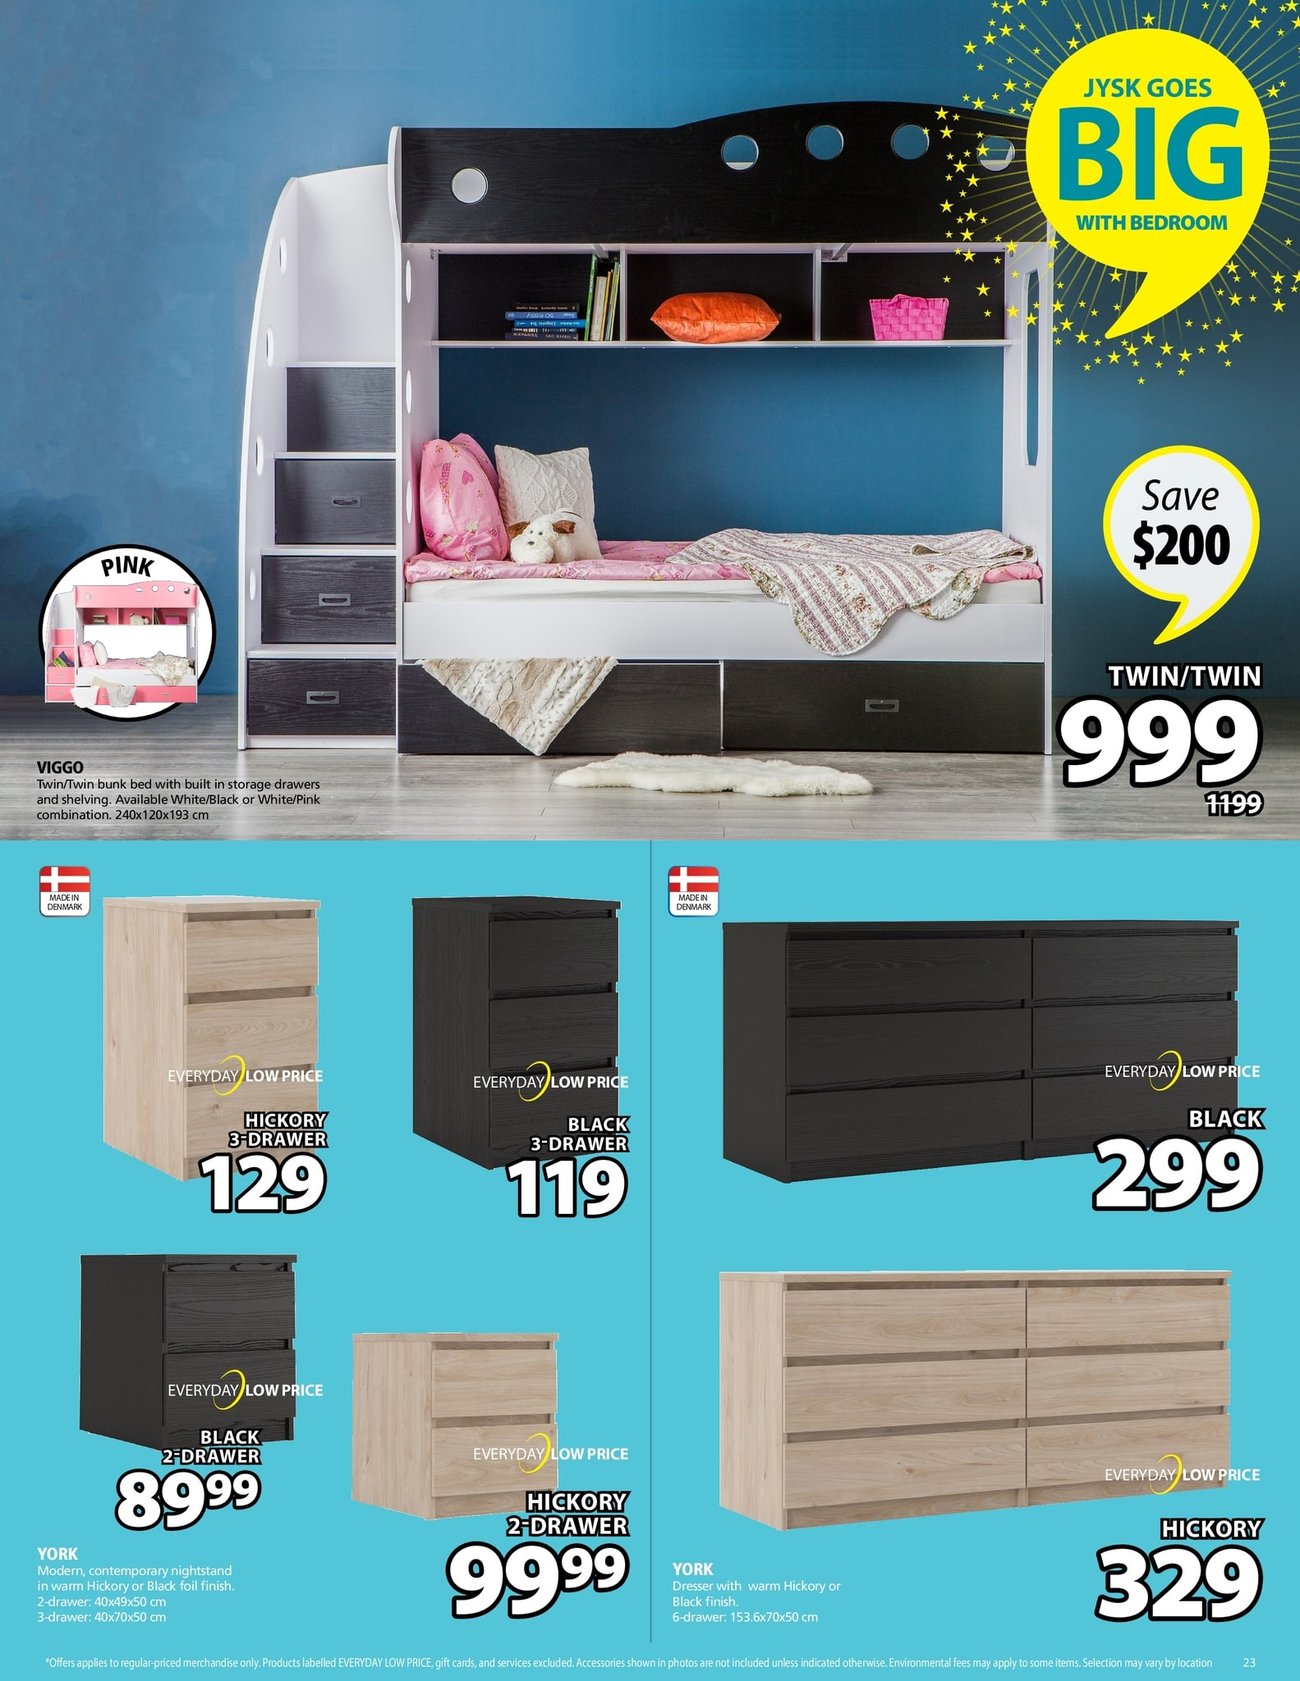 Jysk - Weekly Flyer Specials - Page 23